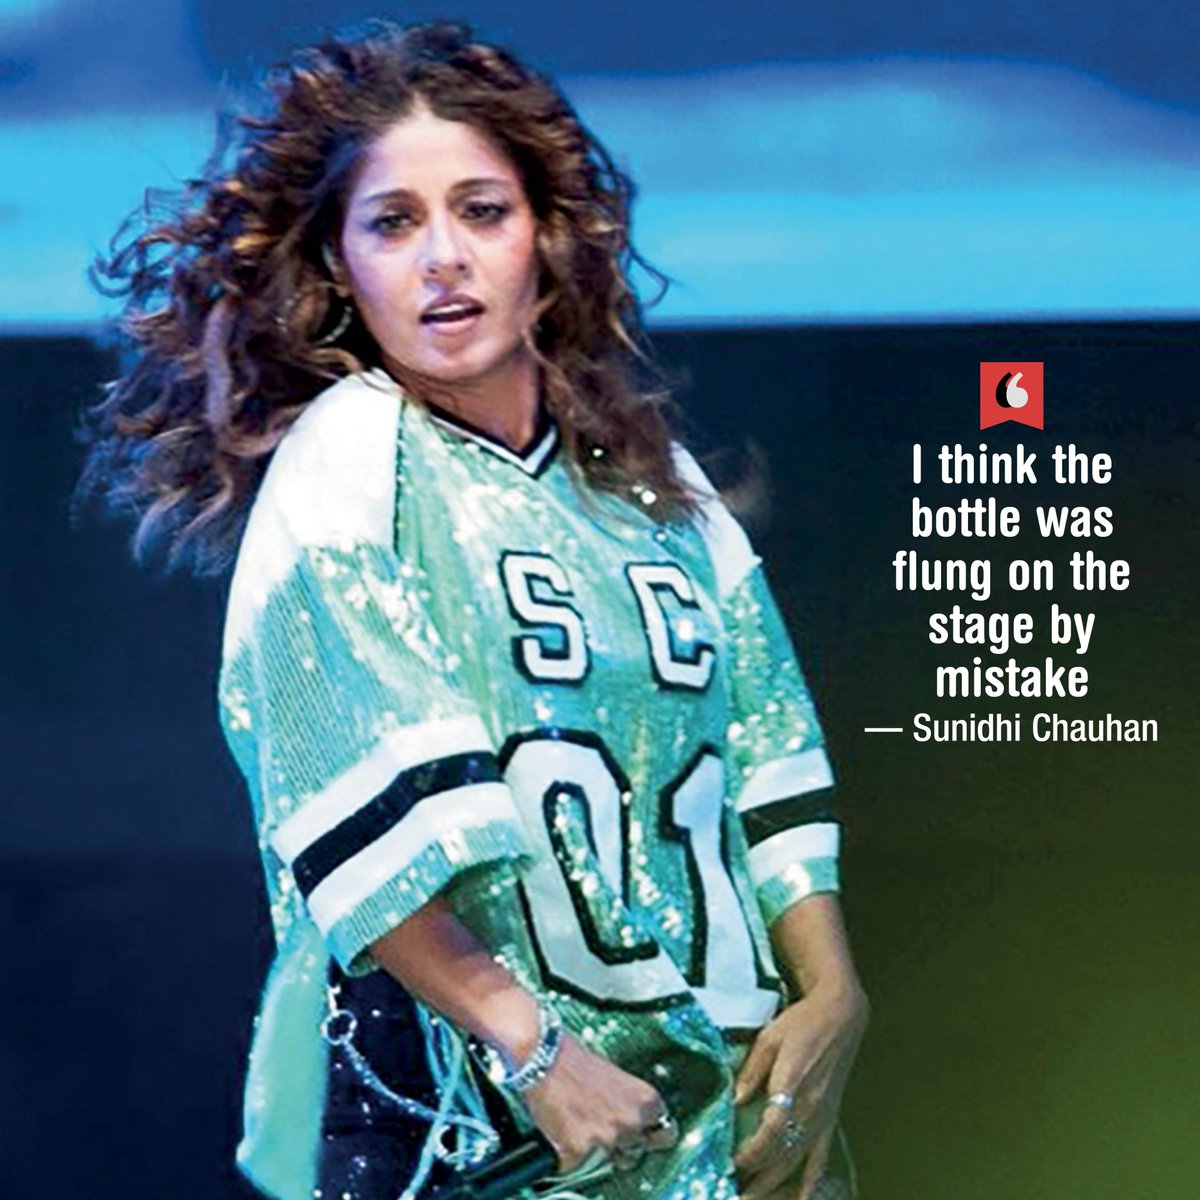 'I was assured that this was only by mistake,' says @SunidhiChauhan5 about the bottle incident that happened on stage while she was performing in #Dehradun Read: shorturl.at/iqvxQ #SunidhiChauhan #SunidhiChauhanLive #TrendingNow